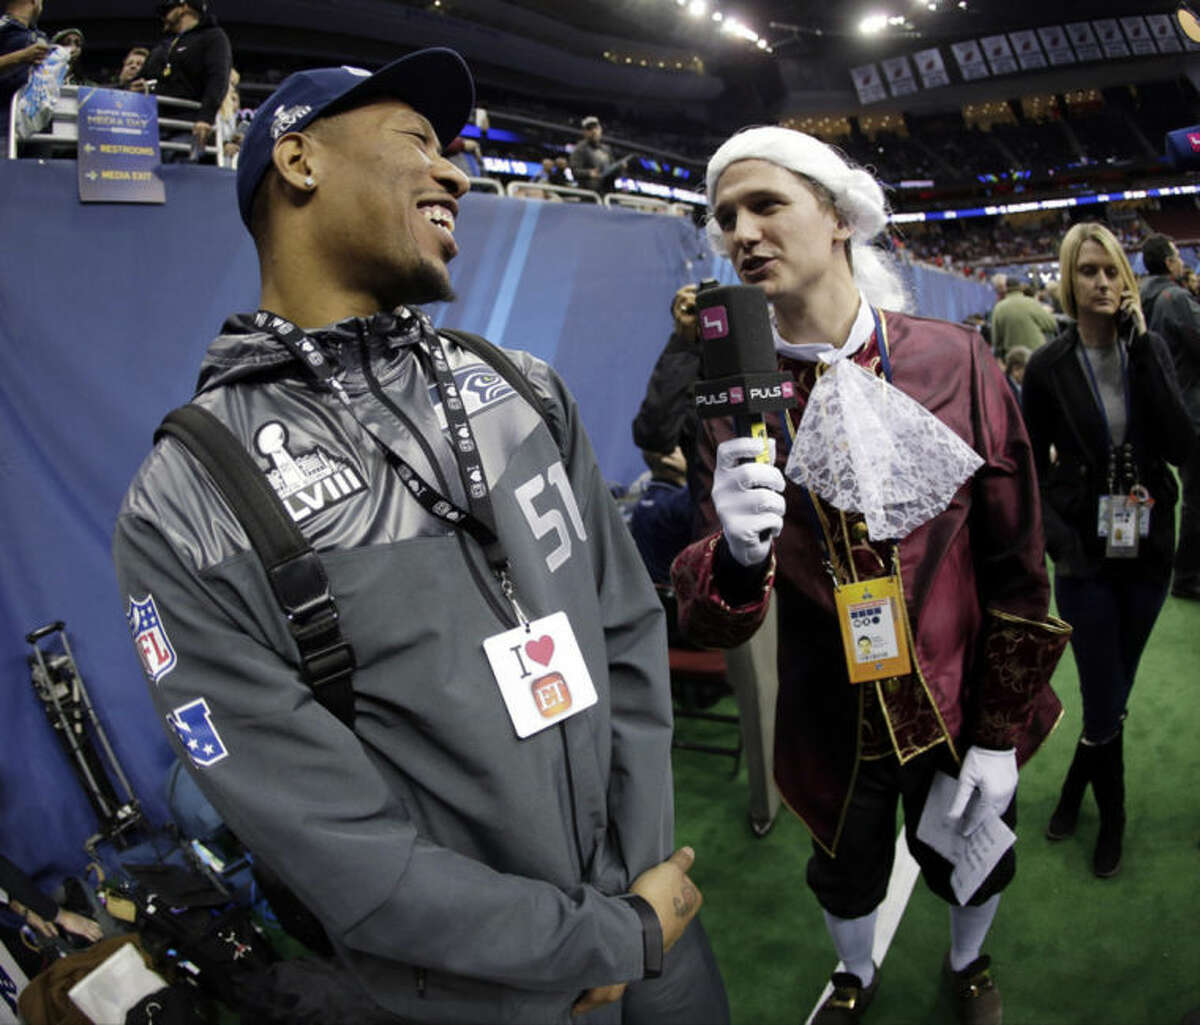 Phillip Hajszan interviews Seattle Seahawks' Bruce Irvin during media day for the NFL Super Bowl XLVIII football game Tuesday, Jan. 28, 2014, in Newark, N.J. (AP Photo/Charlie Riedel)